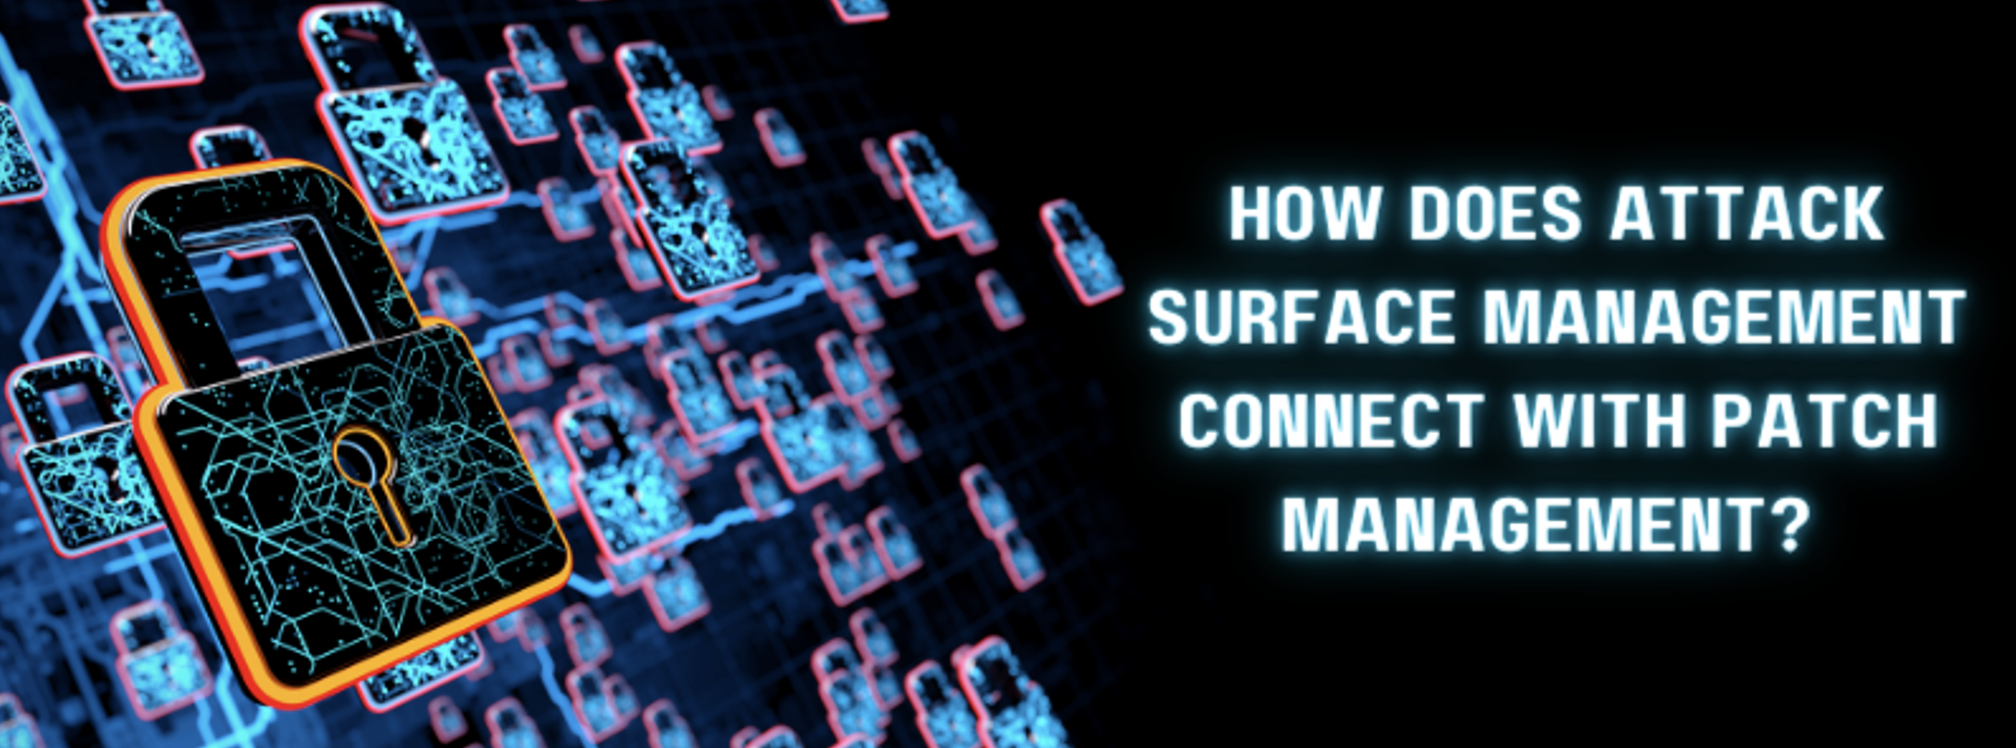 How Does Attack Surface Management Connect with Patch Management?